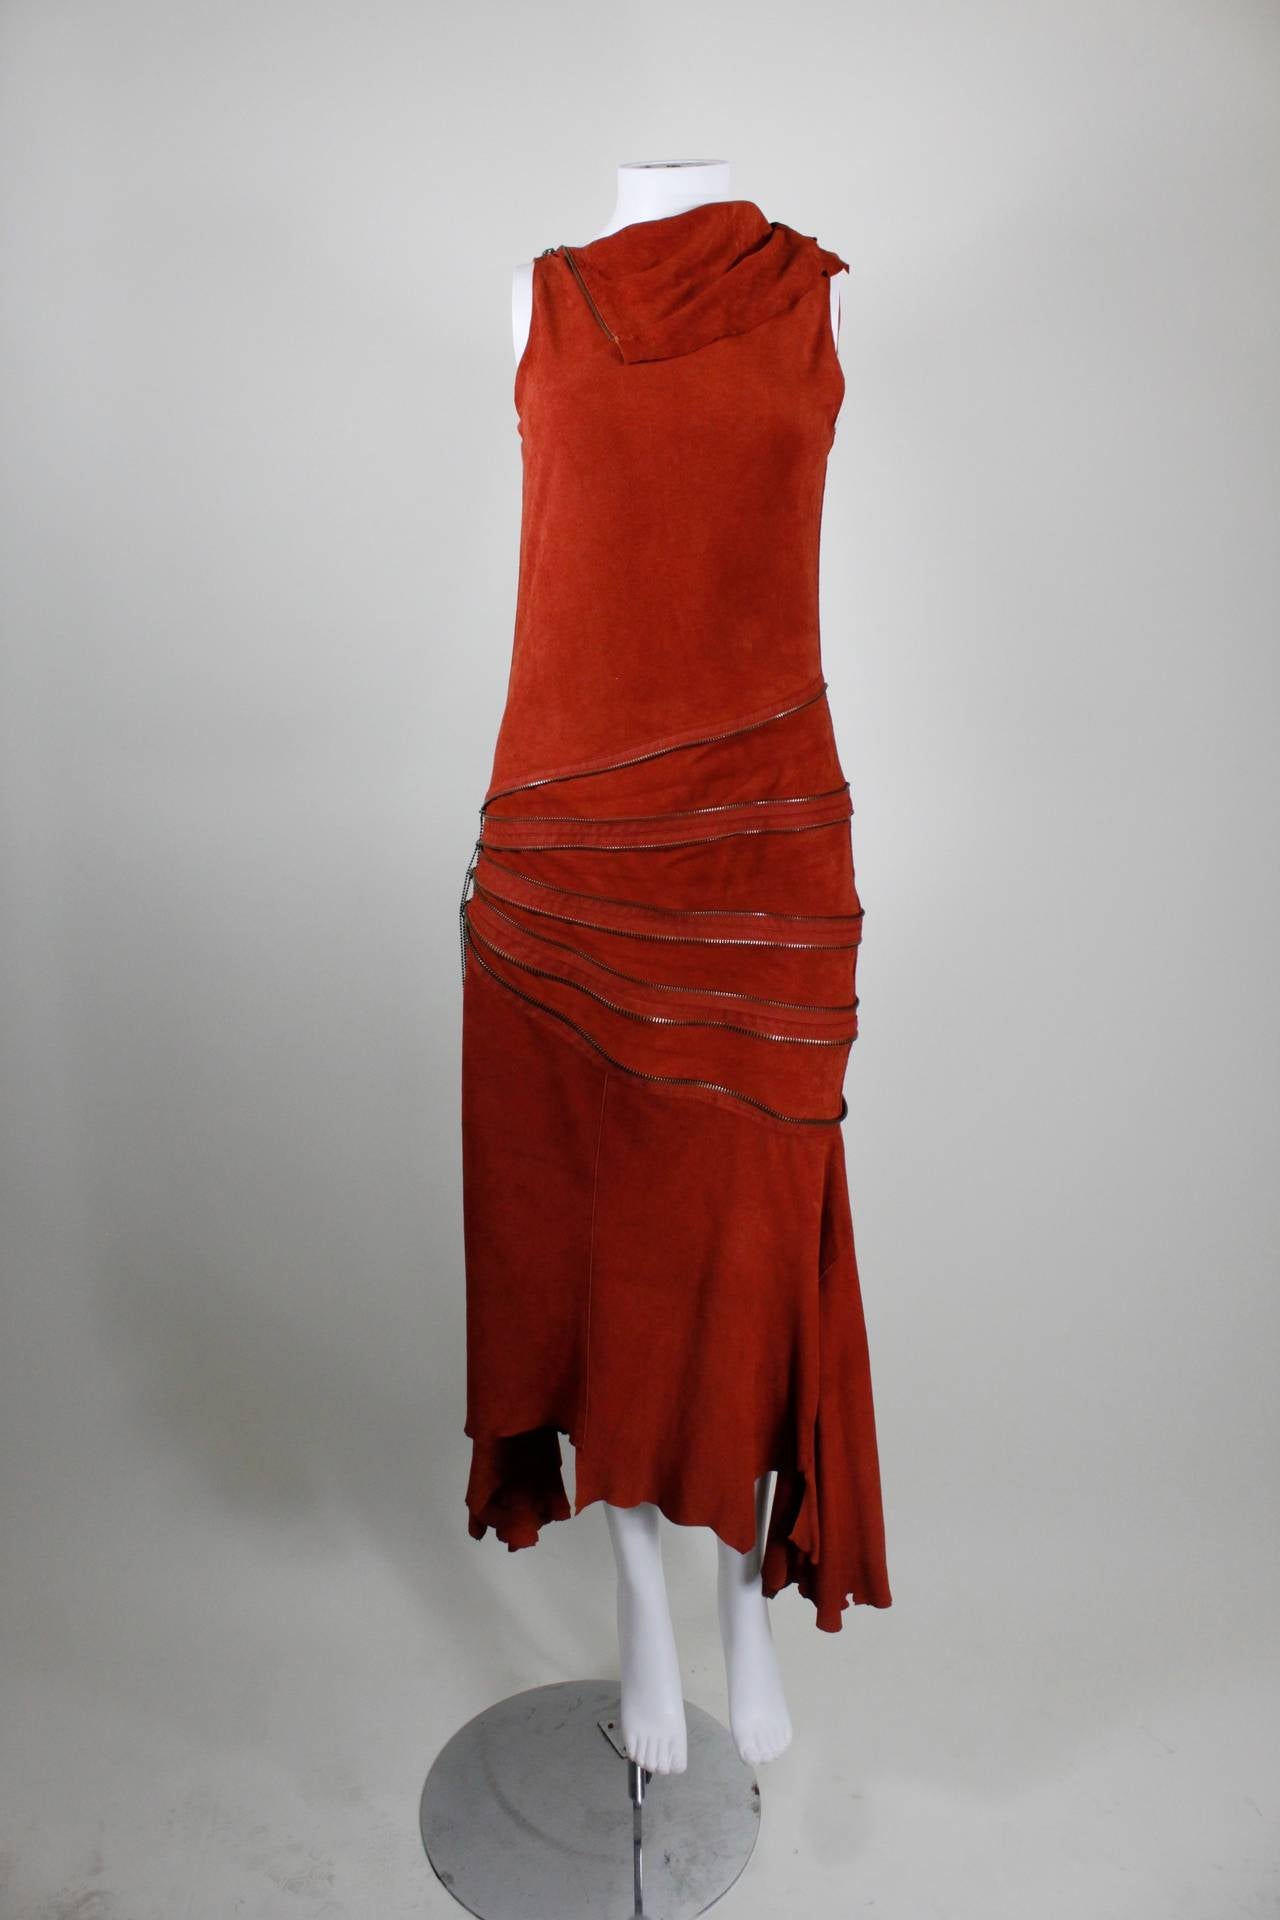 Gaultier Burnt Rust Suede Asymmetrical Zipper Dress In Excellent Condition For Sale In Los Angeles, CA